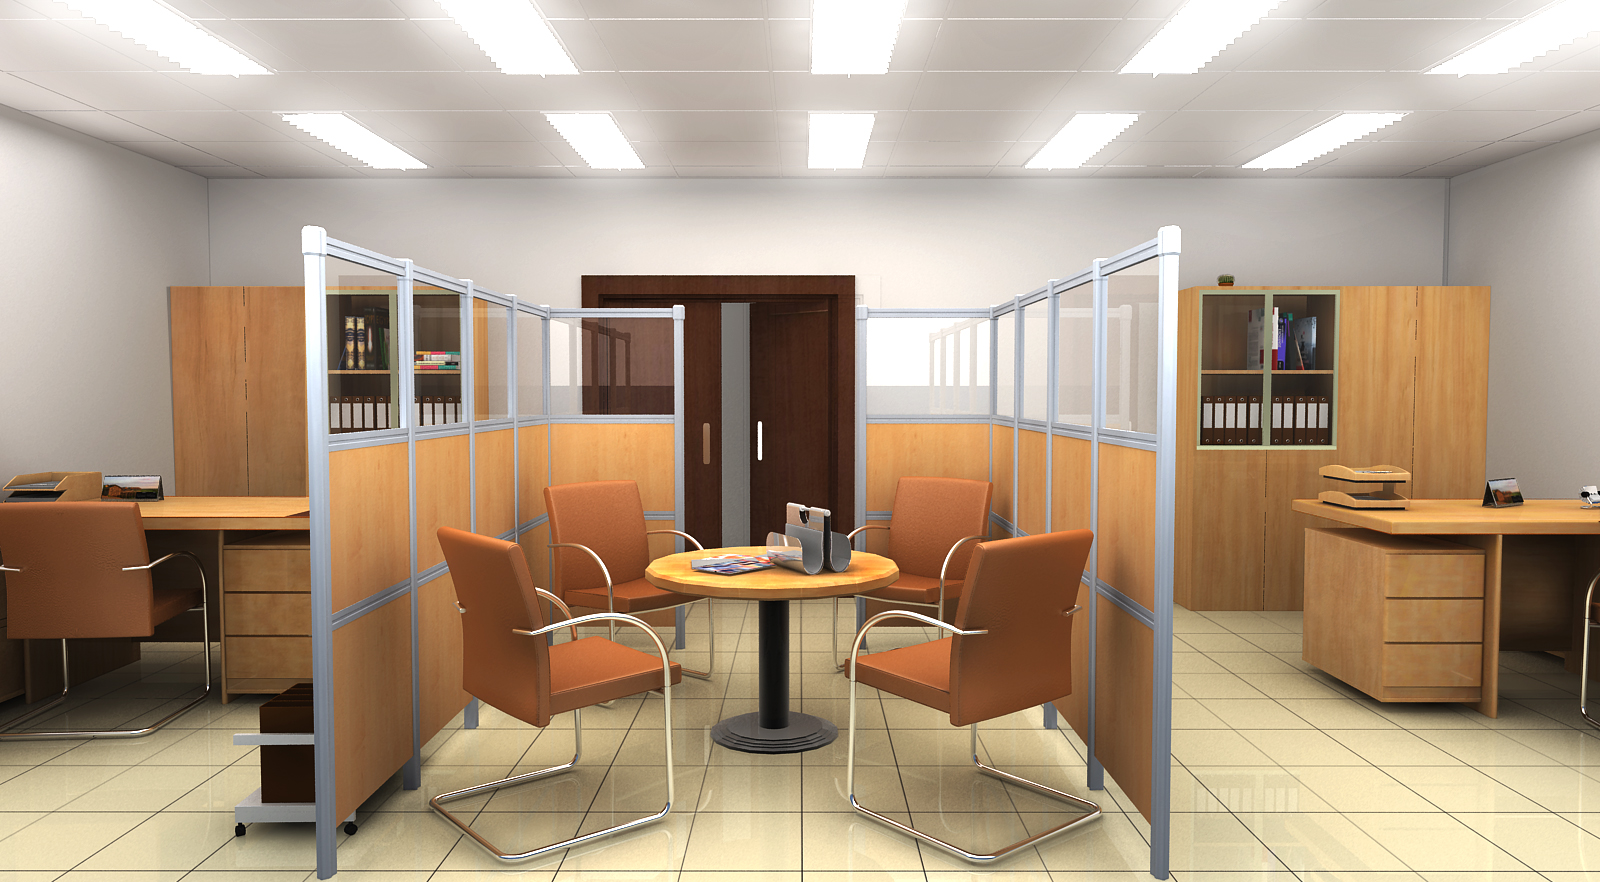 Office Office Room Modern On For Rooms 3d By Harakiri 7 Y Hakema Co 19 Office Room